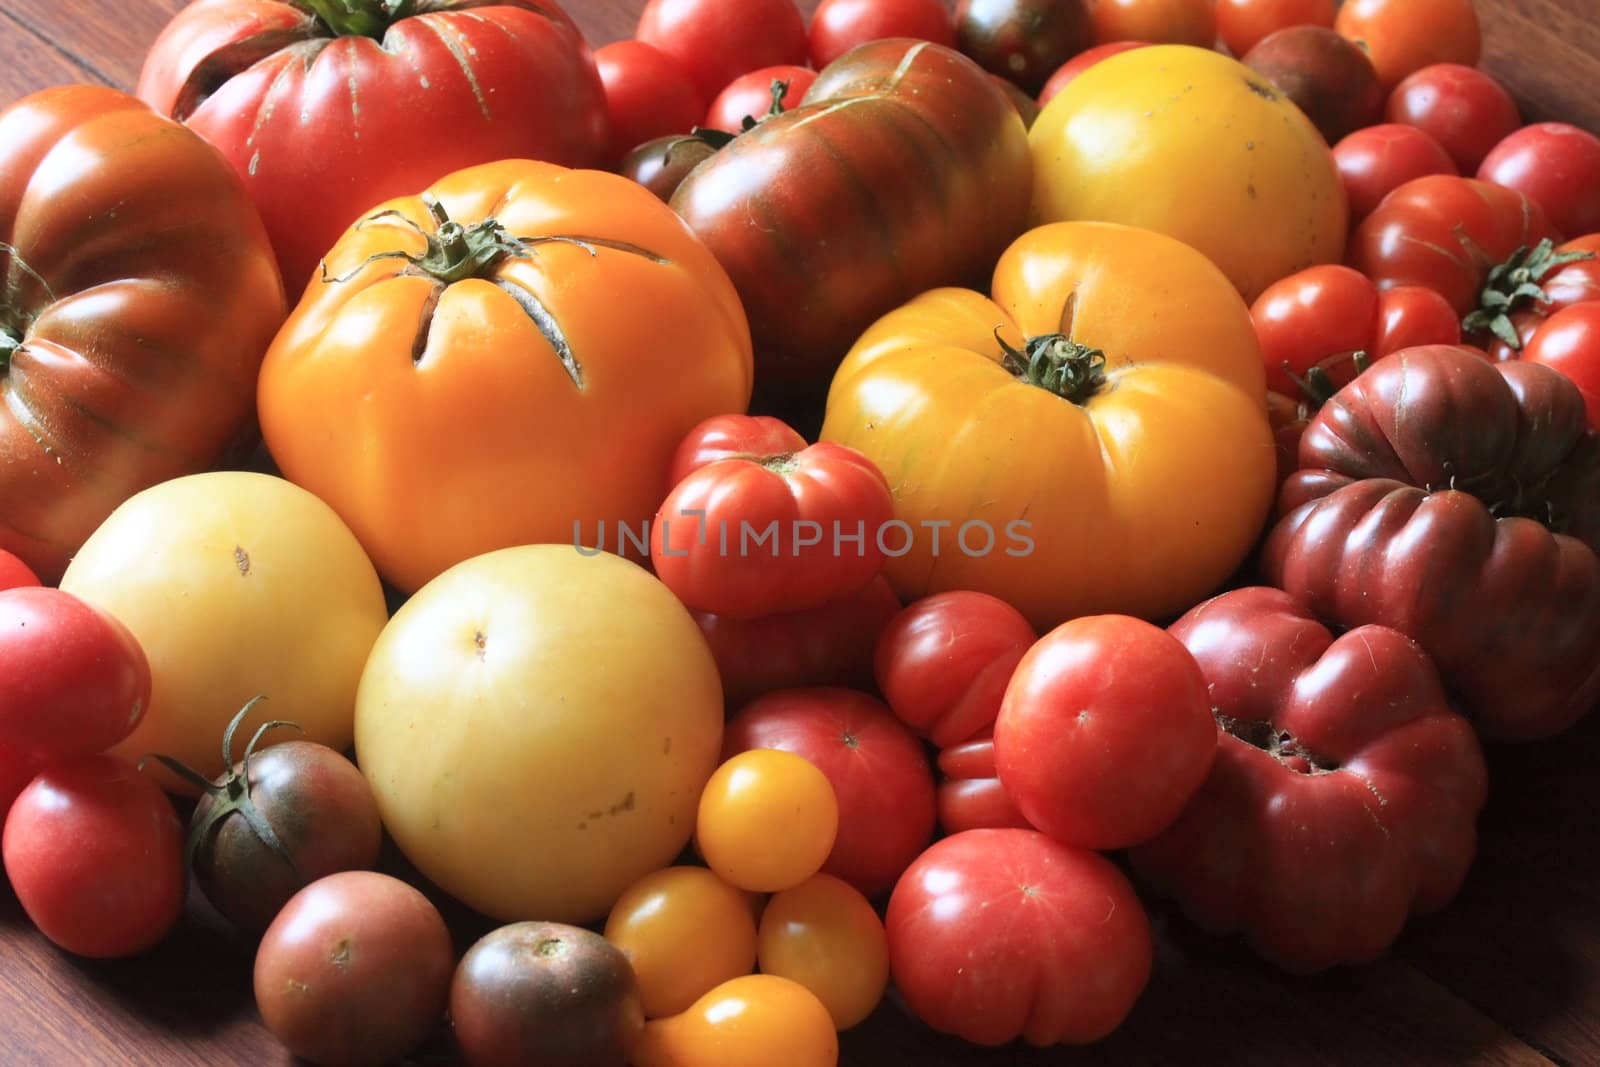 A colourful collection of organic heirloom tomatoes.